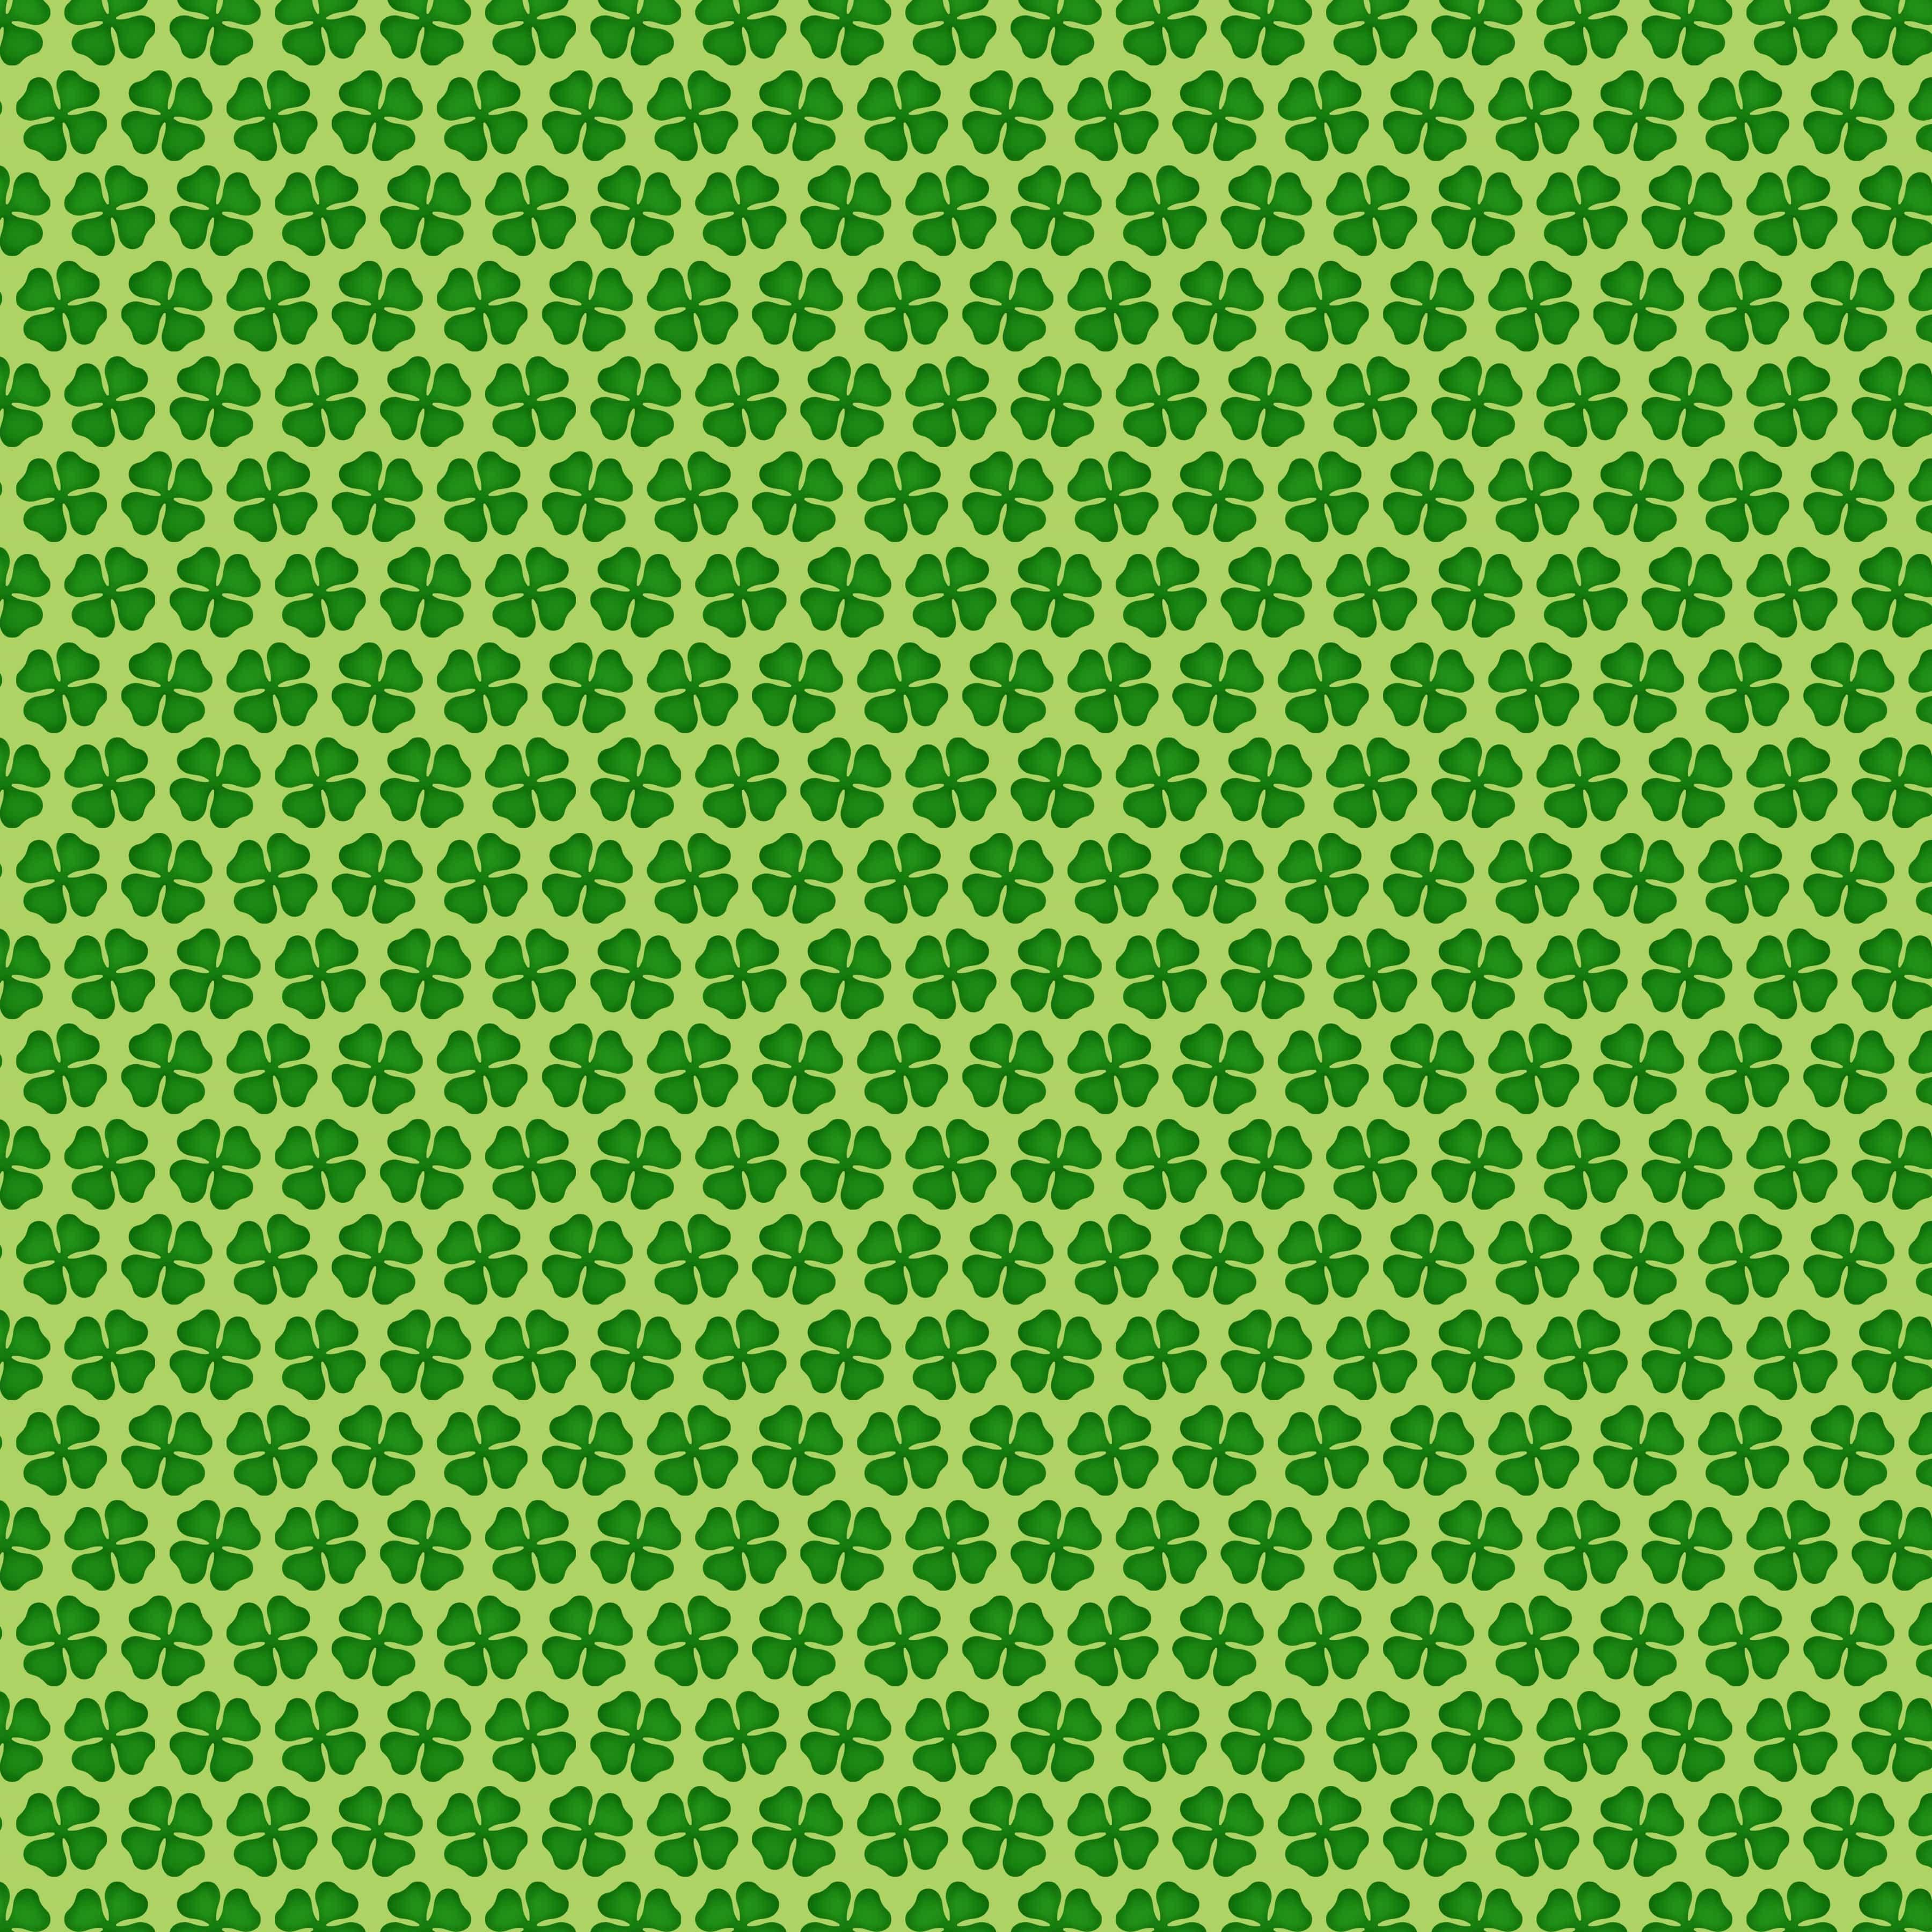 Lucky Irish Collection Lucky Menagerie 12 x 12 Double-Sided Scrapbook Paper by SSC Designs - Scrapbook Supply Companies